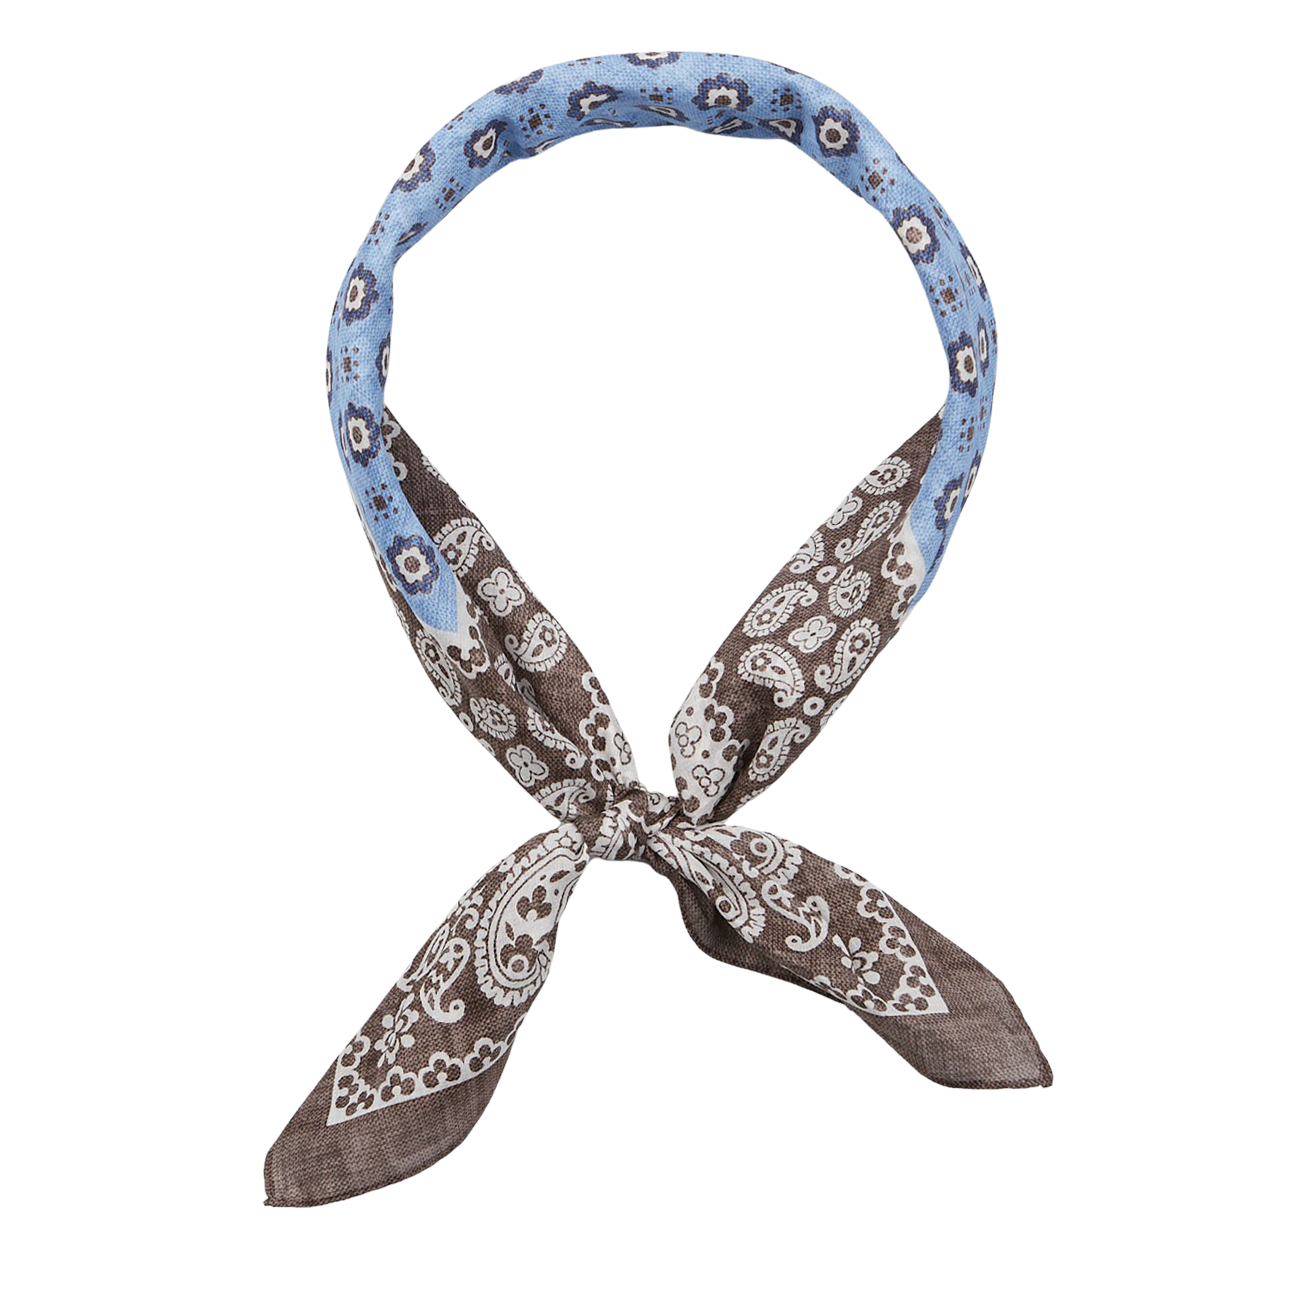 A Brown Melange Paisley Print Cotton Bandana tied in a knot against a white background by Amanda Christensen.